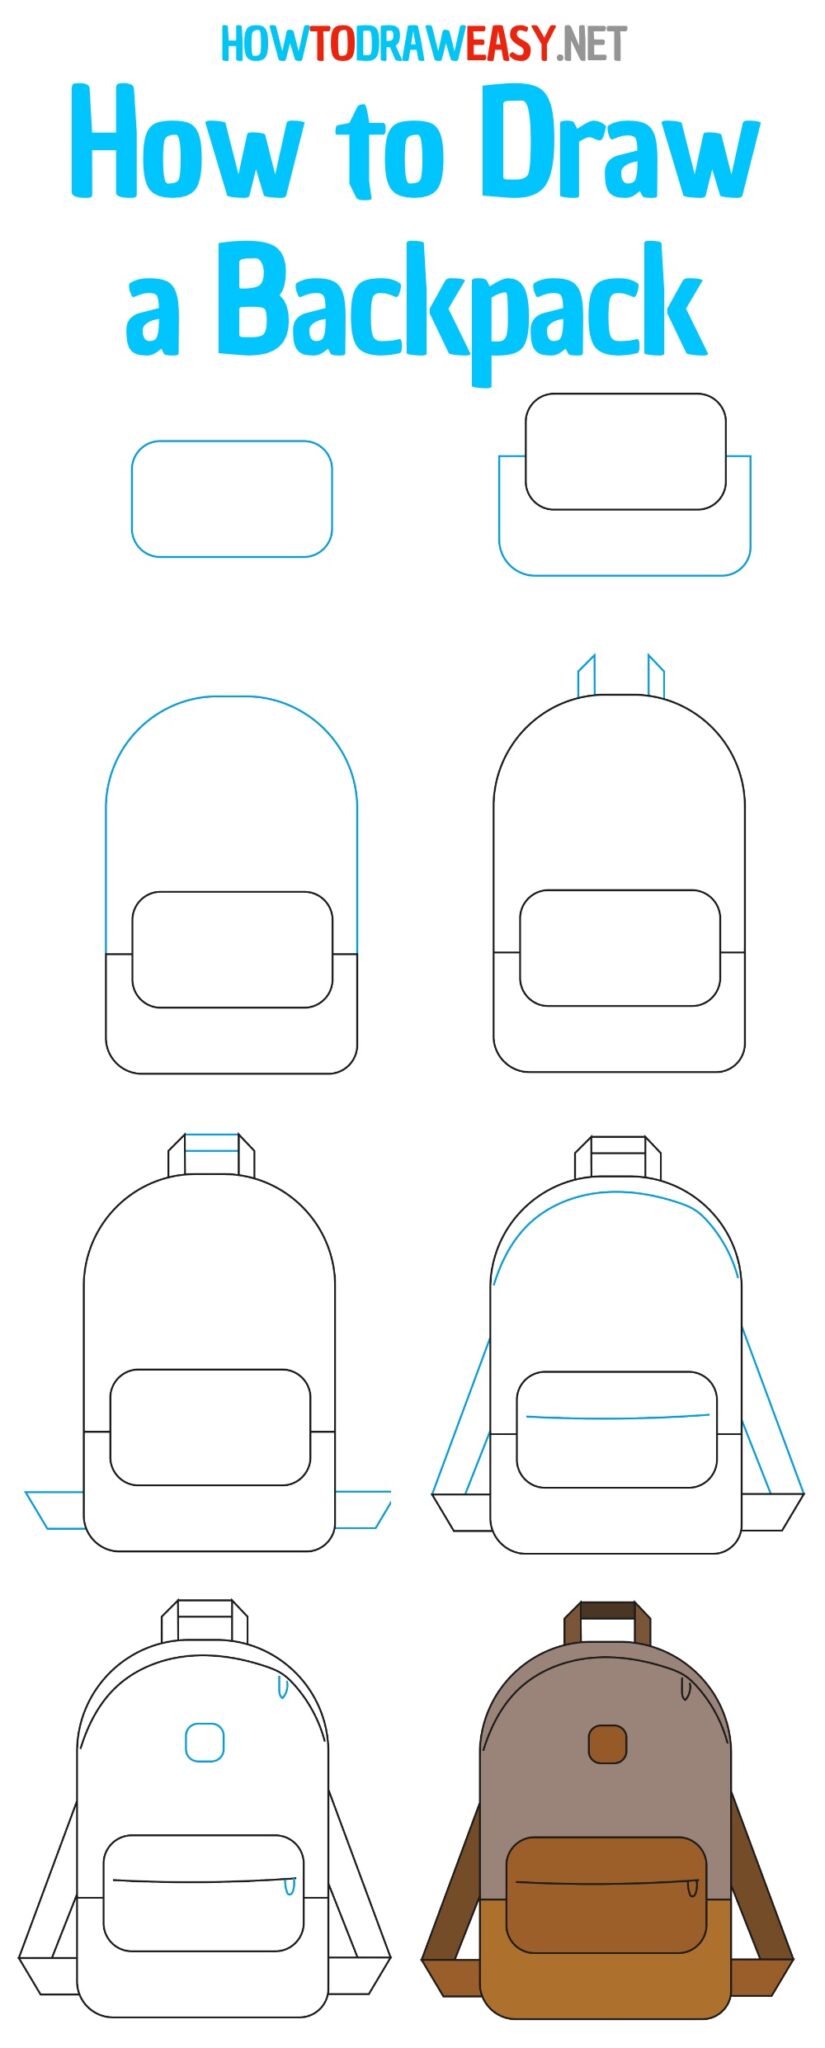 How to Draw a Backpack How to Draw Easy